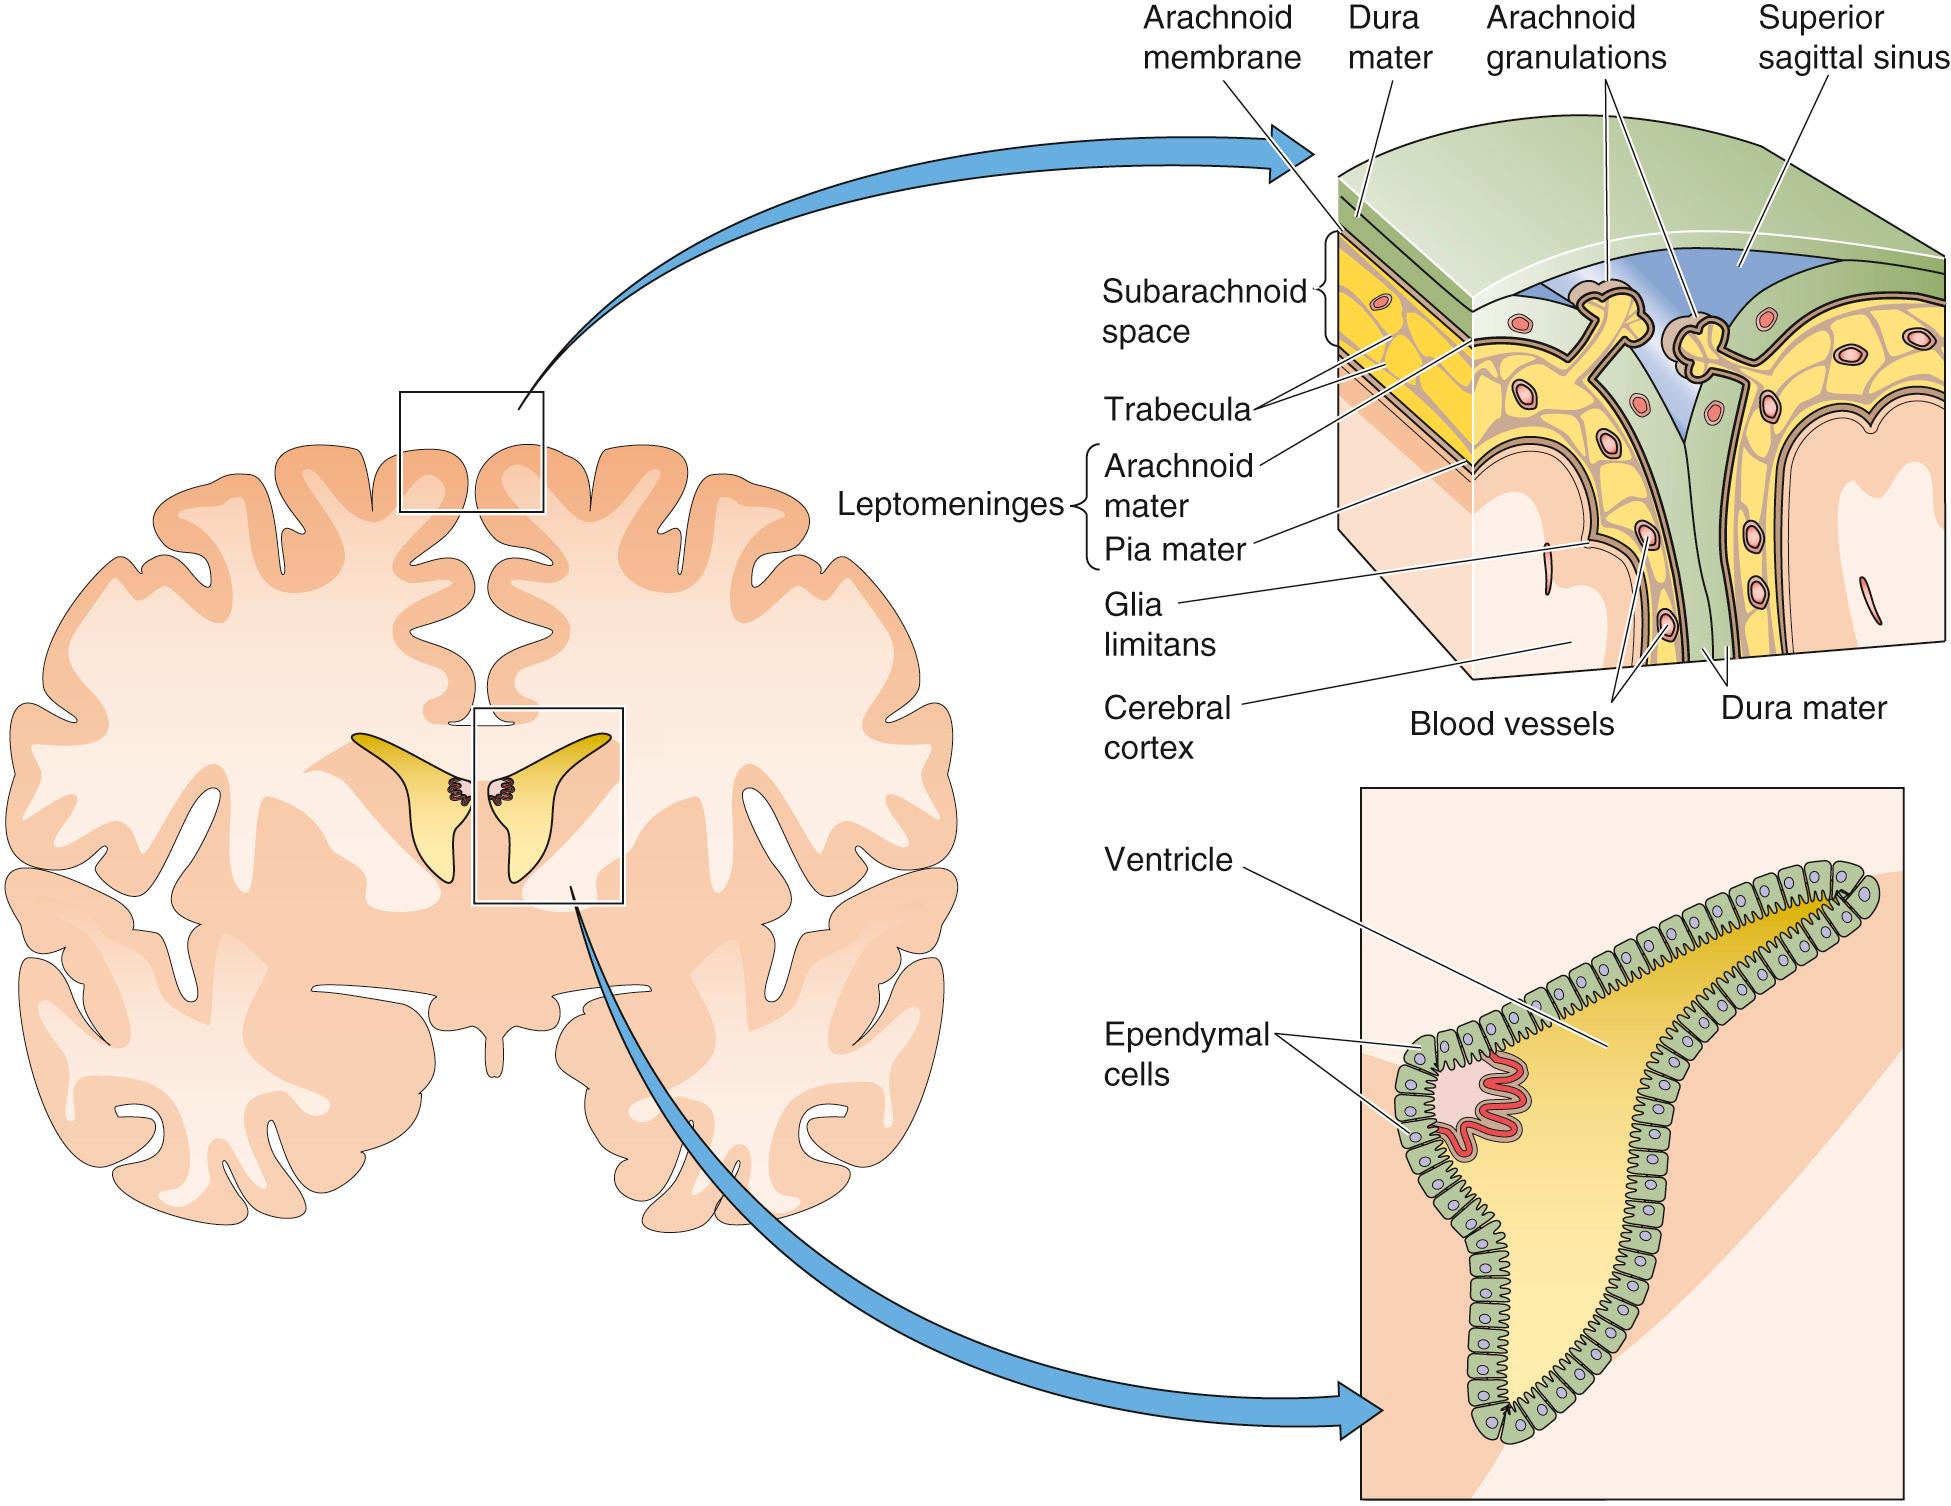 Figure 11-2, The meninges and ependymal cells. The figure represents a coronal section through the anterior portion of the brain. The upper inset shows the three layers of meninges: the dura mater, which here is split into two layers to accommodate the superior sagittal sinus (filled with venous blood); the arachnoid mater, which is formed by cells that are interconnected by tight junctions; and the pia mater, which closely adheres to a layer composed of astrocyte endfeet that are covered by a basement membrane (glia limitans). The lower inset shows ependymal cells lining the interior of the frontal horn of the left ventricle. Both the subarachnoid space and the cavities of the ventricles are filled with CSF.